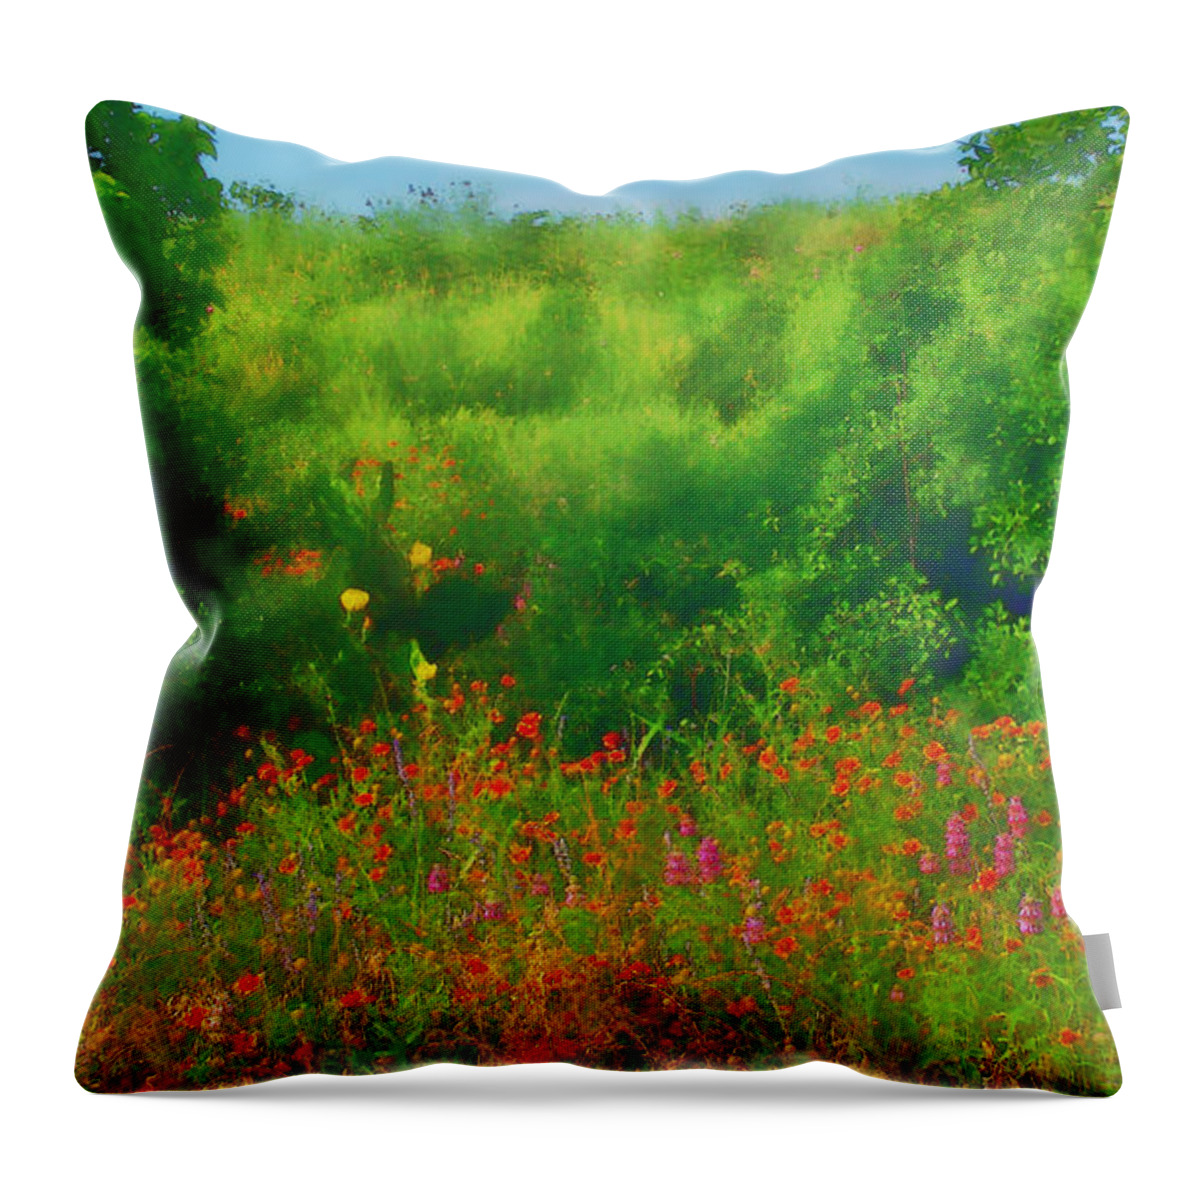 Hill Country Texas Scenic Throw Pillow featuring the digital art Hill Country Texas Wildflower Fields by Pamela Smale Williams